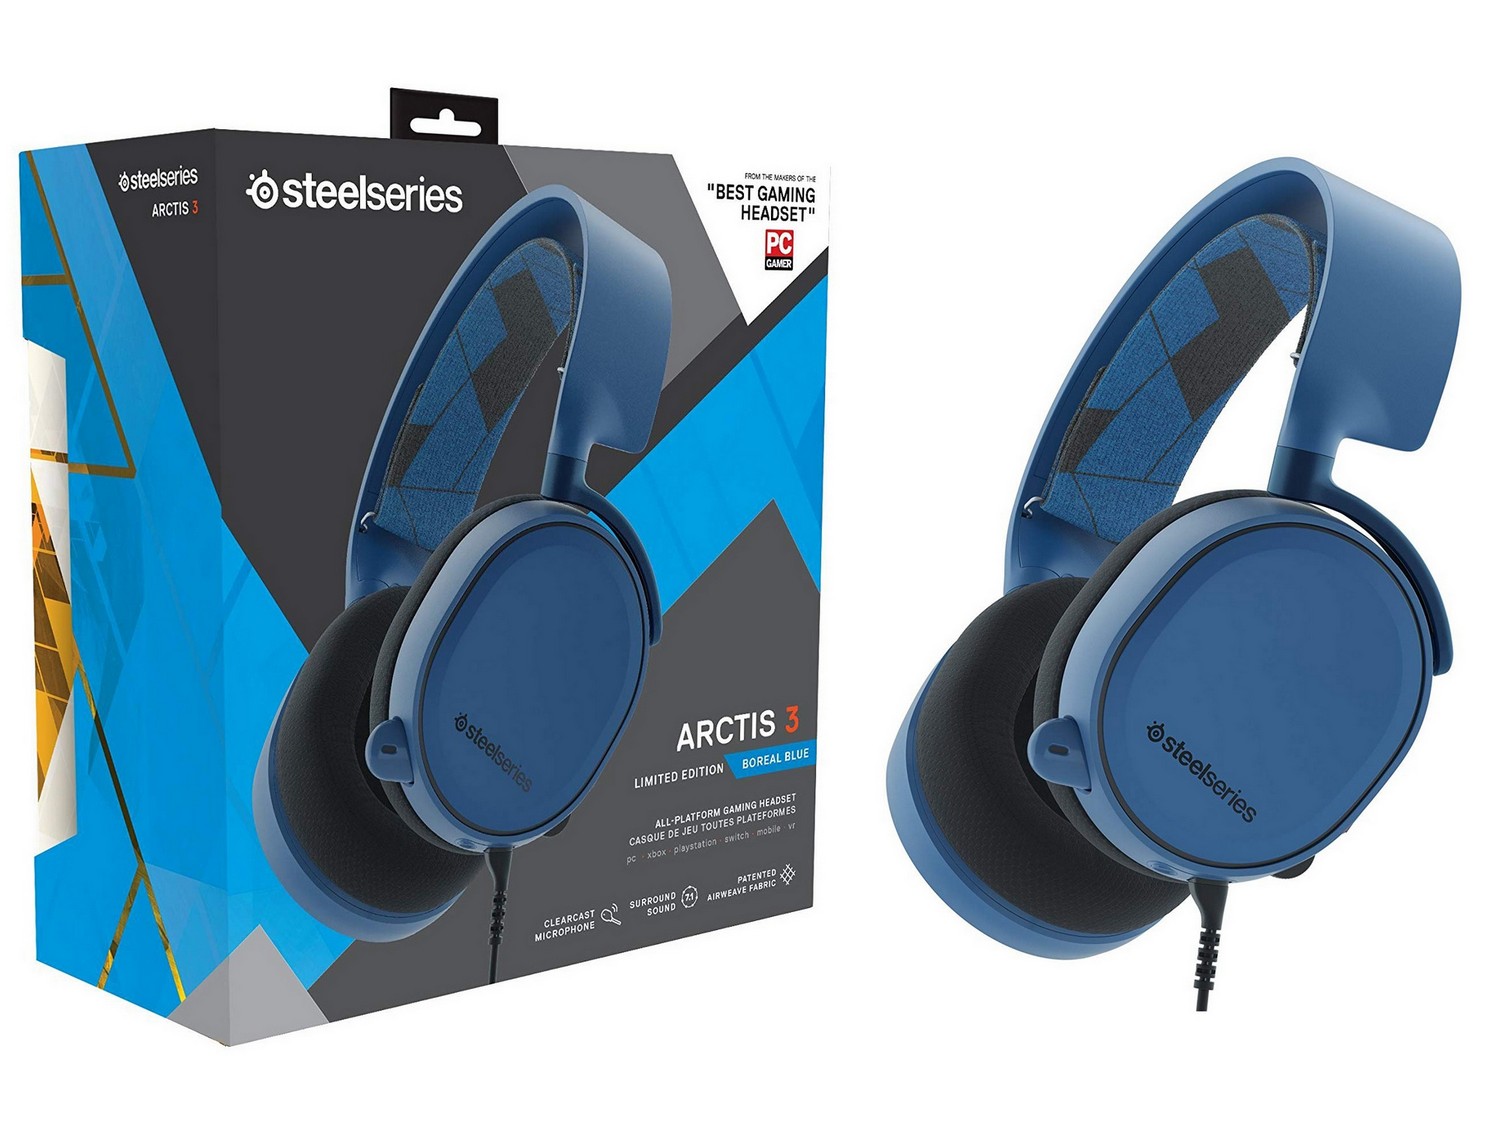 SteelSeries Arctis 3 Limited Edition Wired Headset - Boreal Blue (PS4, Xbox One, PC)